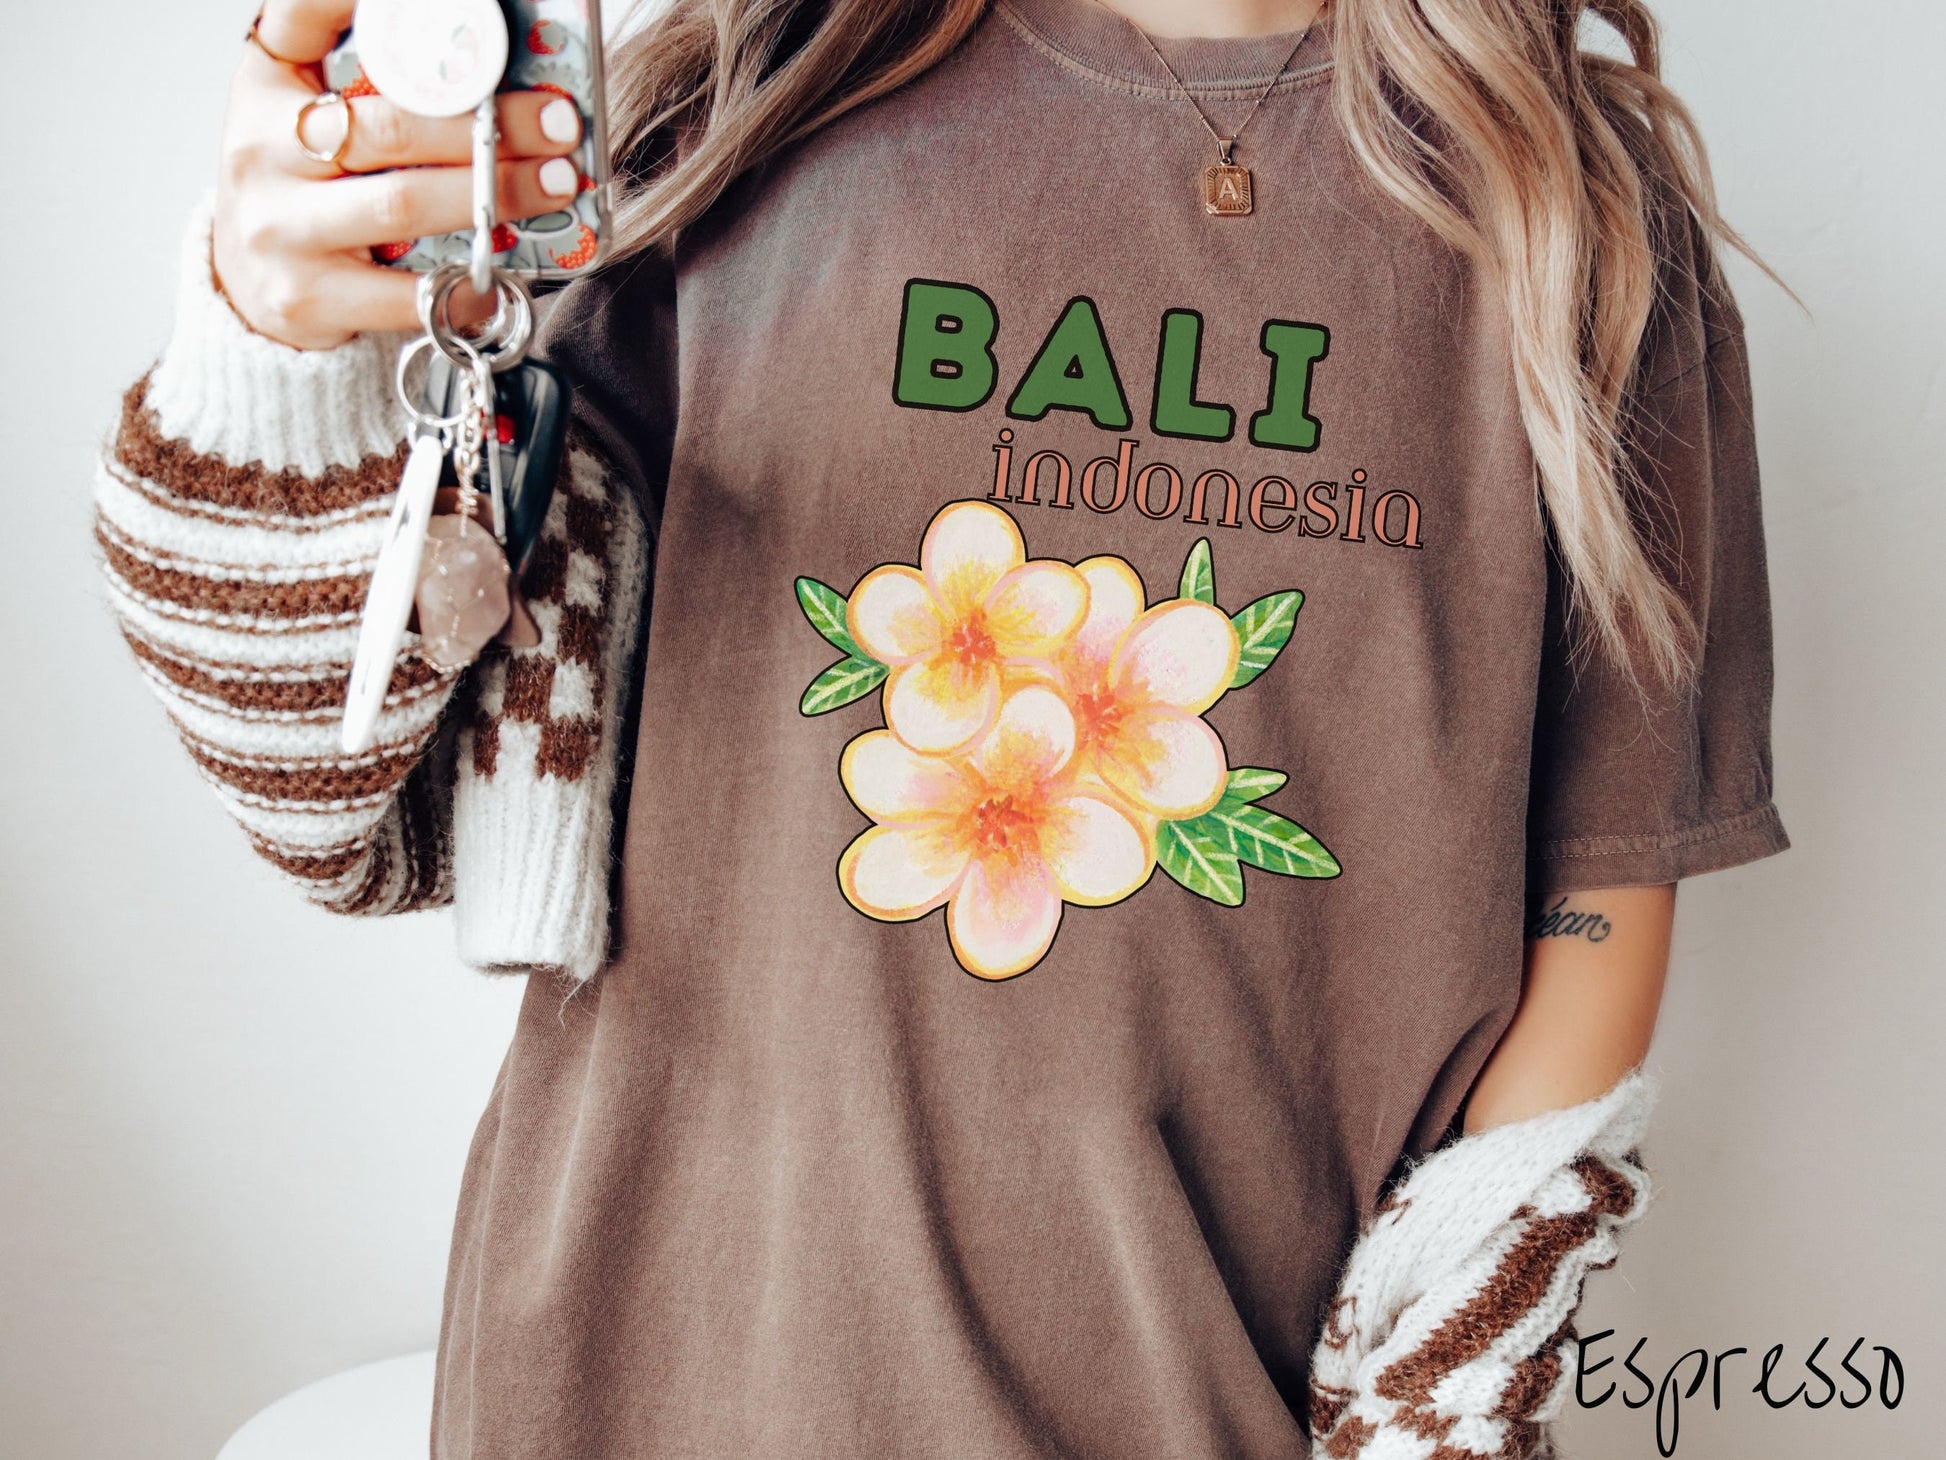 A woman wearing a vintage, espresso colored shirt with the text Bali Indonesia in green and yellow font, respectively, and a picture underneath of three beautiful yellow and orange flowers with green leaves.